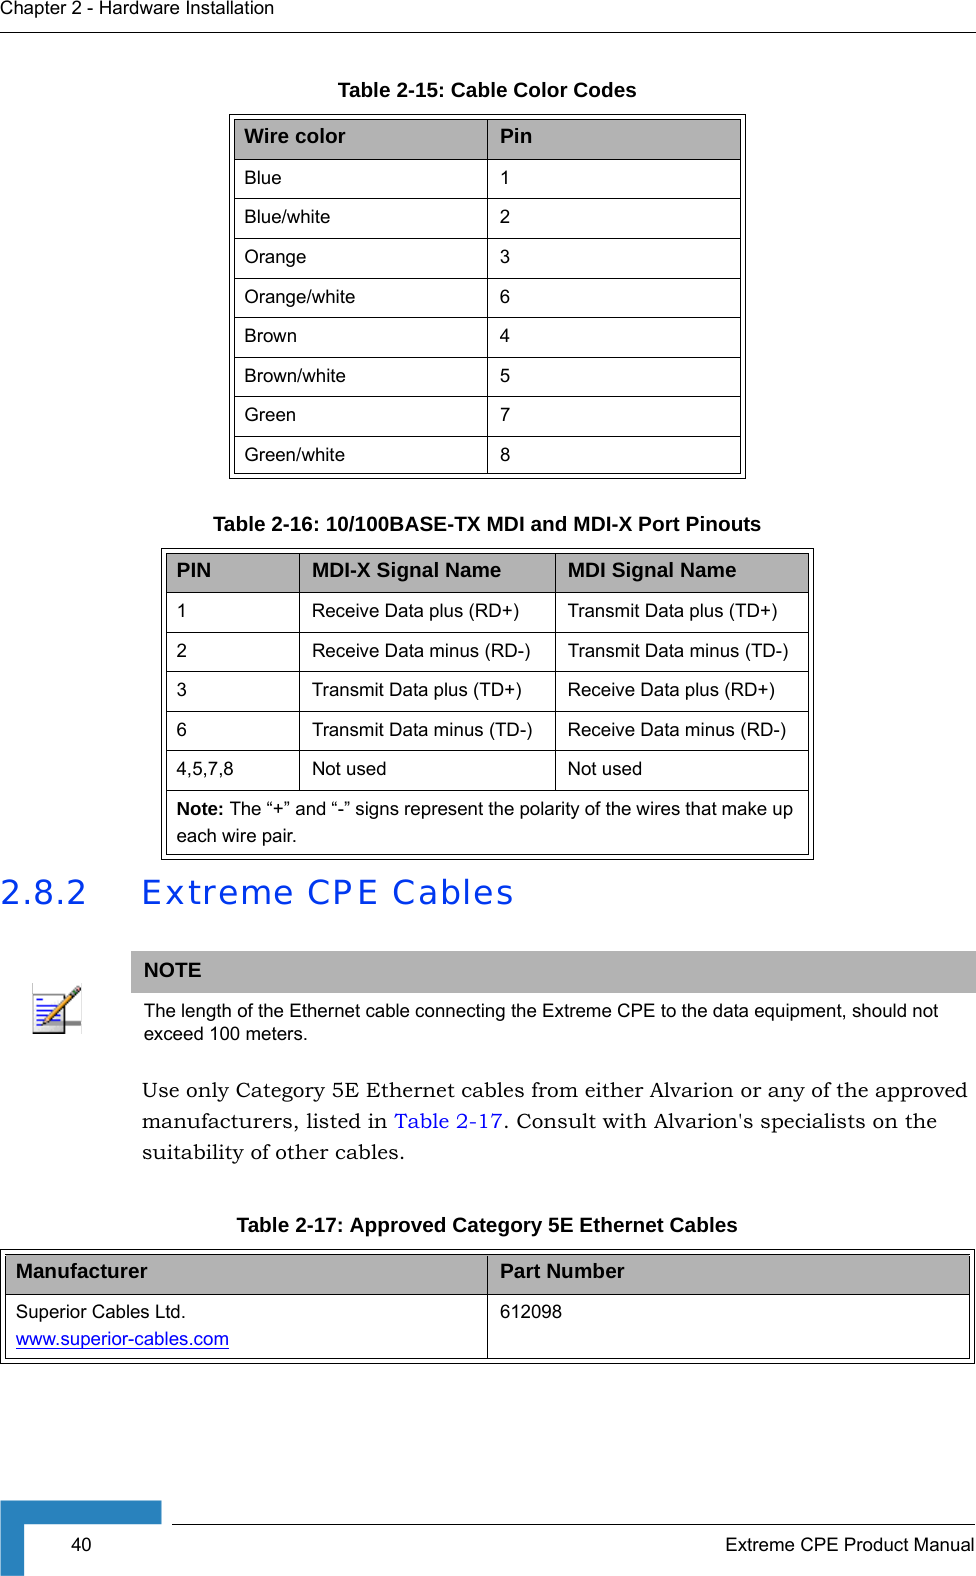 40 Extreme CPE Product ManualChapter 2 - Hardware Installation2.8.2 Extreme CPE CablesUse only Category 5E Ethernet cables from either Alvarion or any of the approved manufacturers, listed in Table 2-17. Consult with Alvarion&apos;s specialists on the suitability of other cables.Table 2-15: Cable Color CodesWire color PinBlue 1Blue/white 2Orange 3Orange/white 6Brown 4Brown/white 5Green 7Green/white 8Table 2-16: 10/100BASE-TX MDI and MDI-X Port PinoutsPIN MDI-X Signal Name MDI Signal Name1 Receive Data plus (RD+) Transmit Data plus (TD+)2 Receive Data minus (RD-) Transmit Data minus (TD-)3 Transmit Data plus (TD+) Receive Data plus (RD+)6 Transmit Data minus (TD-) Receive Data minus (RD-)4,5,7,8 Not used Not usedNote: The “+” and “-” signs represent the polarity of the wires that make up each wire pair.NOTEThe length of the Ethernet cable connecting the Extreme CPE to the data equipment, should not exceed 100 meters.Table 2-17: Approved Category 5E Ethernet CablesManufacturer Part NumberSuperior Cables Ltd.  www.superior-cables.com612098  